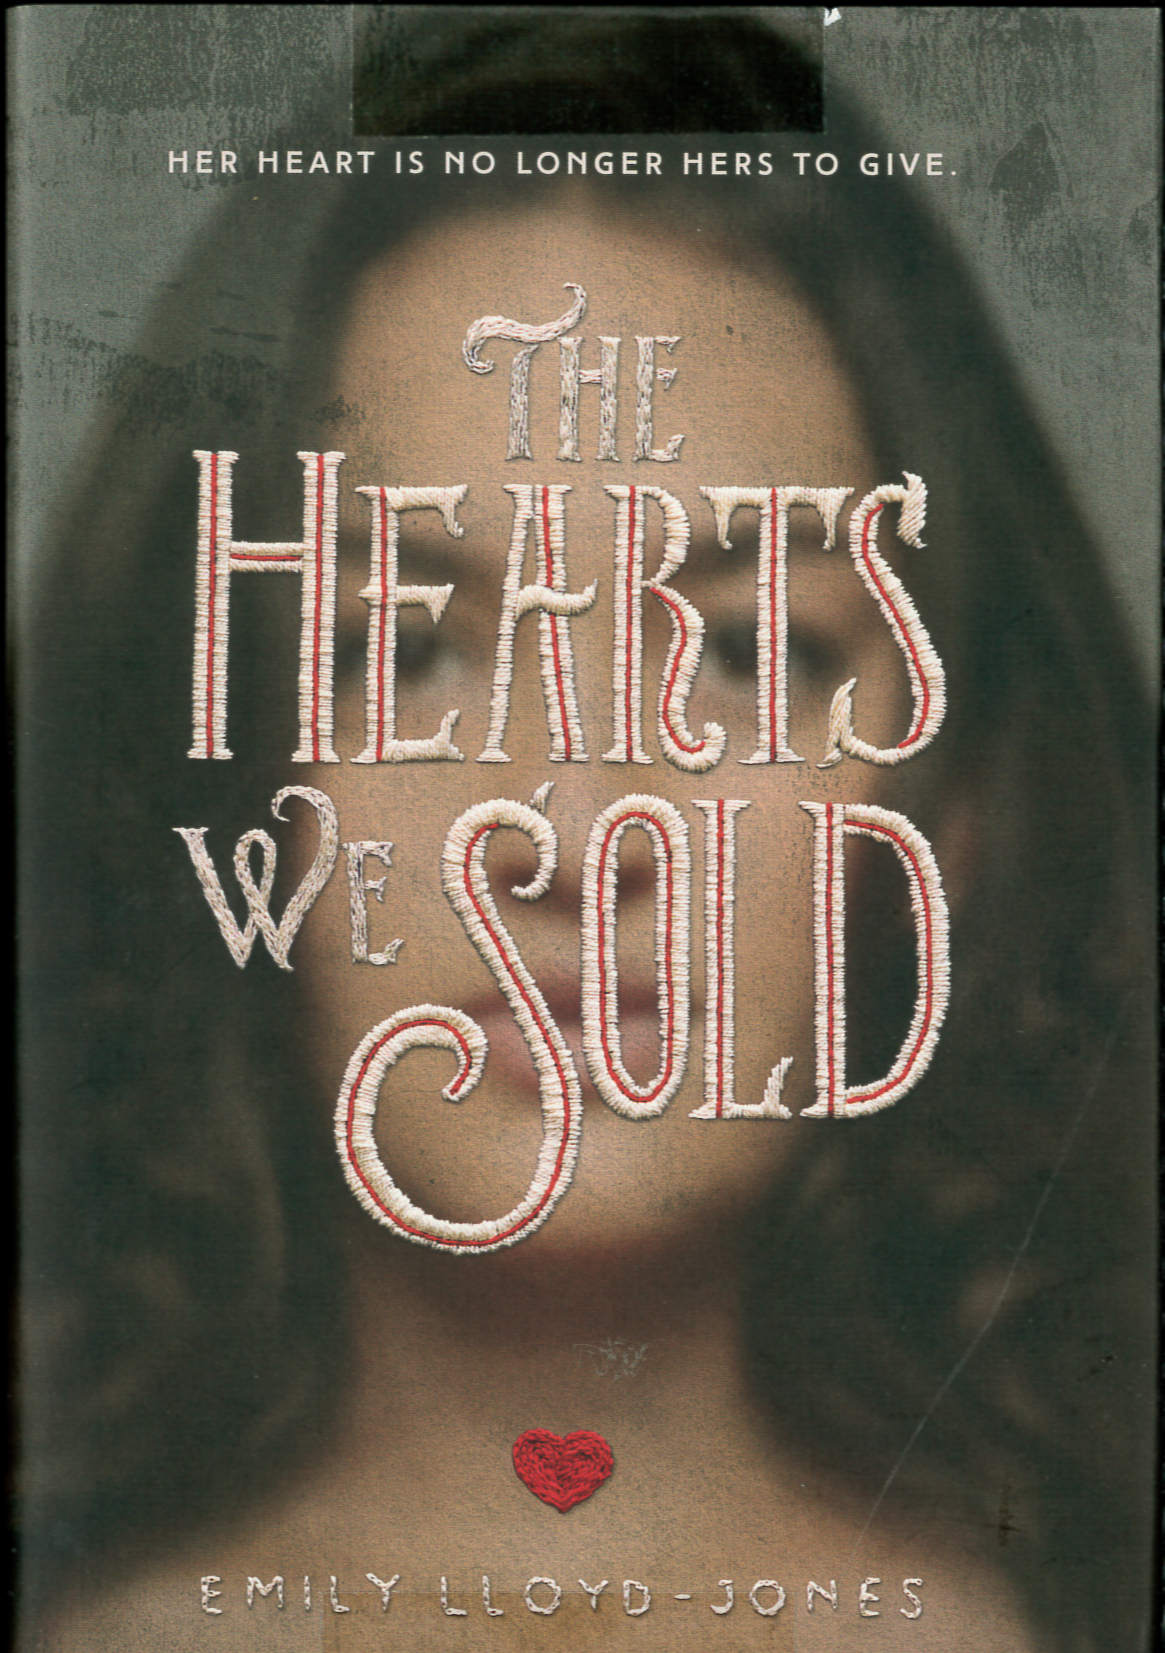 The hearts we sold /